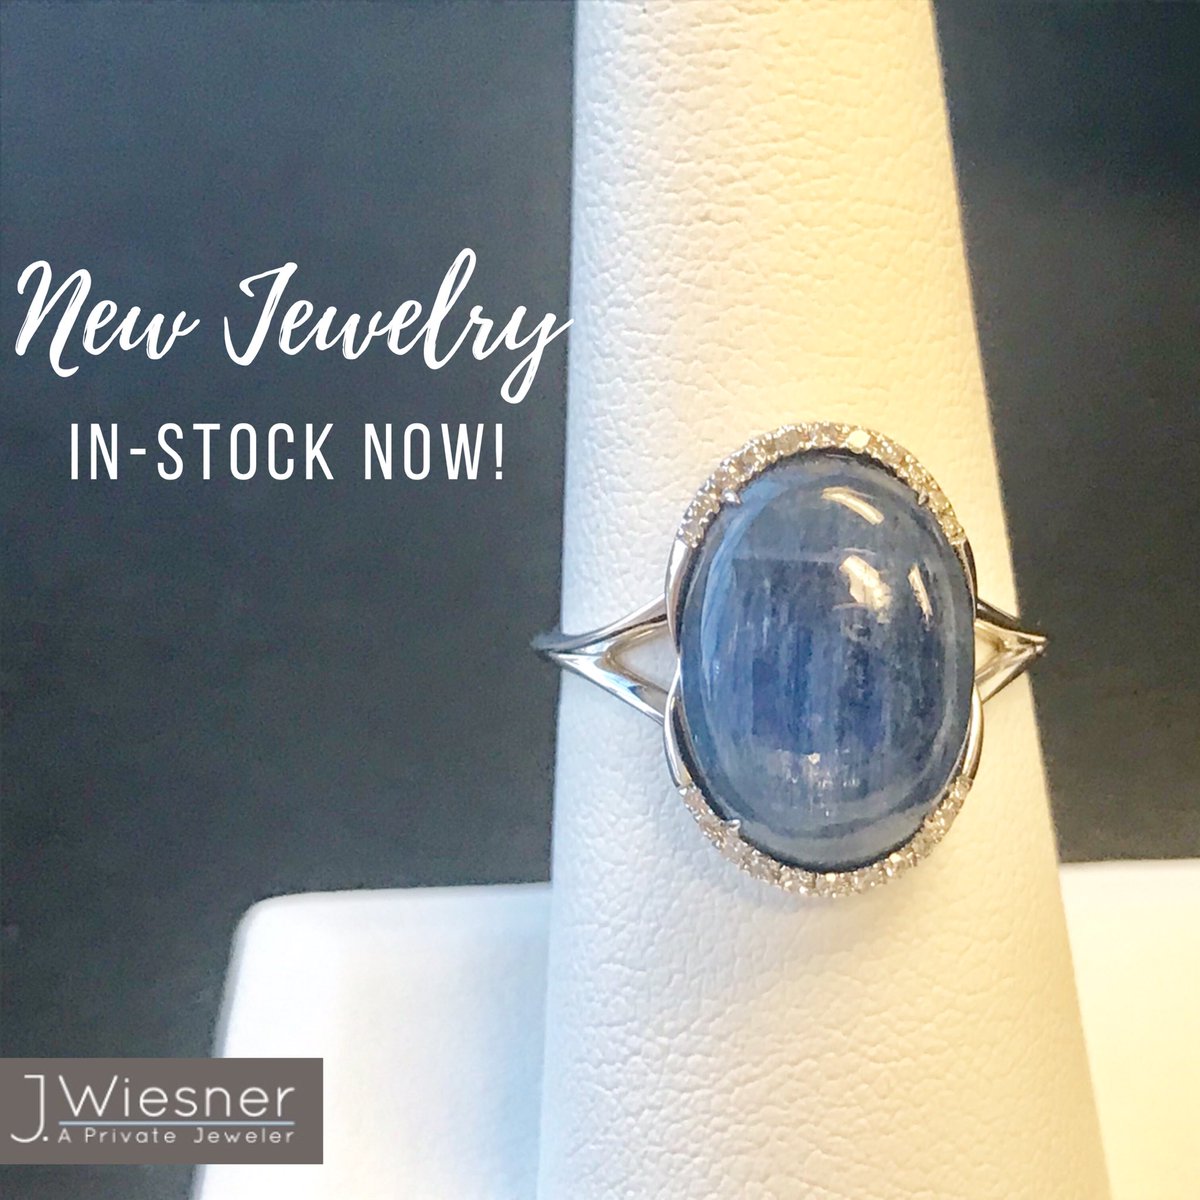 🚨NEW JEWELRY IN-STOCK 🚨  Lots of unique jewelry designs you need to see in person! Call 858-242-5636 or visit JWiesner.com to schedule an appointment. #Ring #BirthstoneRing #LaJolla #SanDiegoJeweler